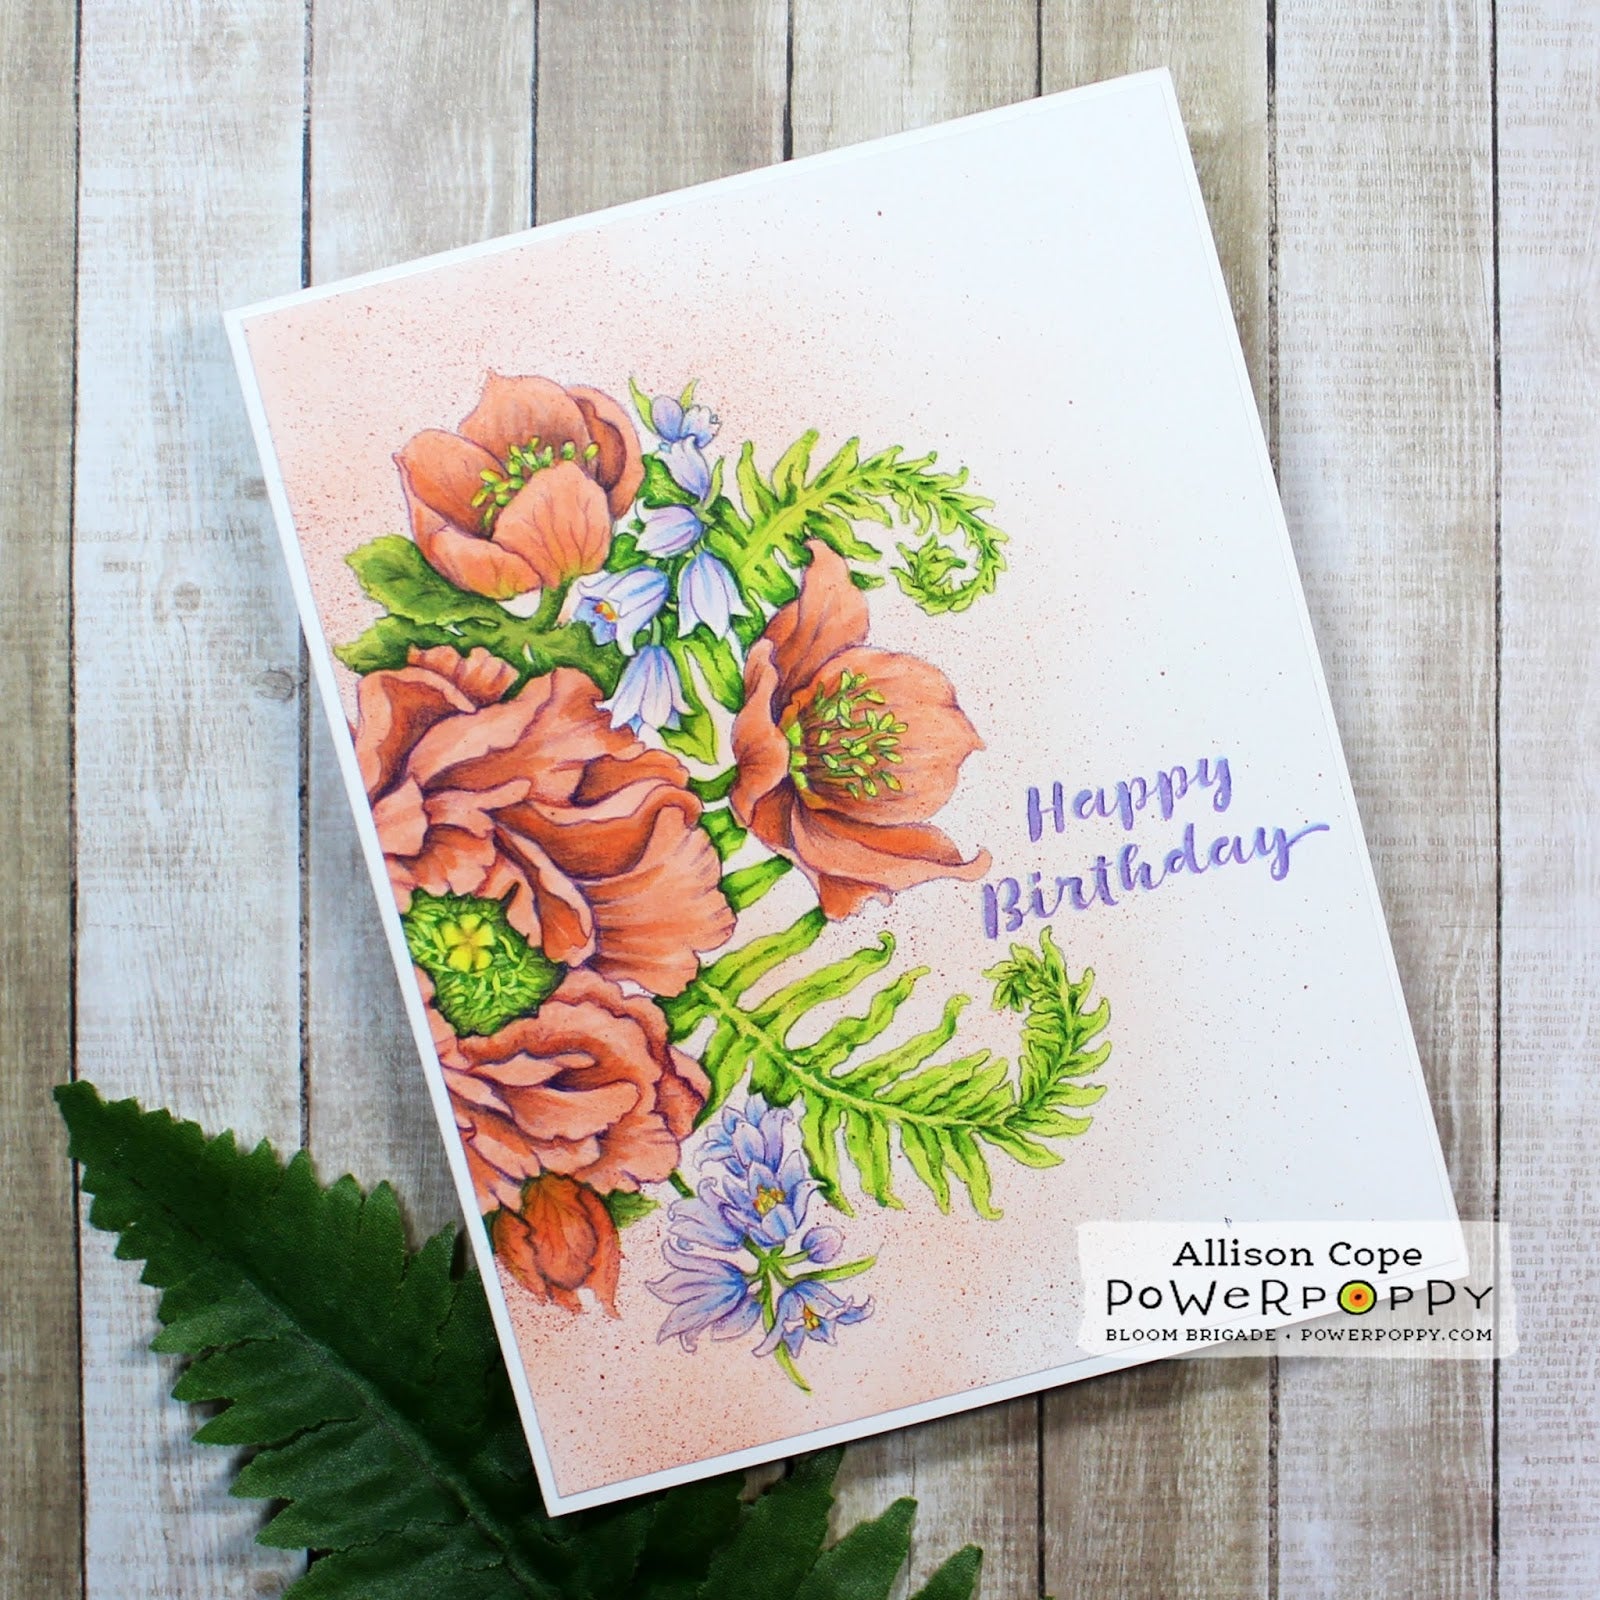 Proud Poppy Greeting Card - Flowers by Annette